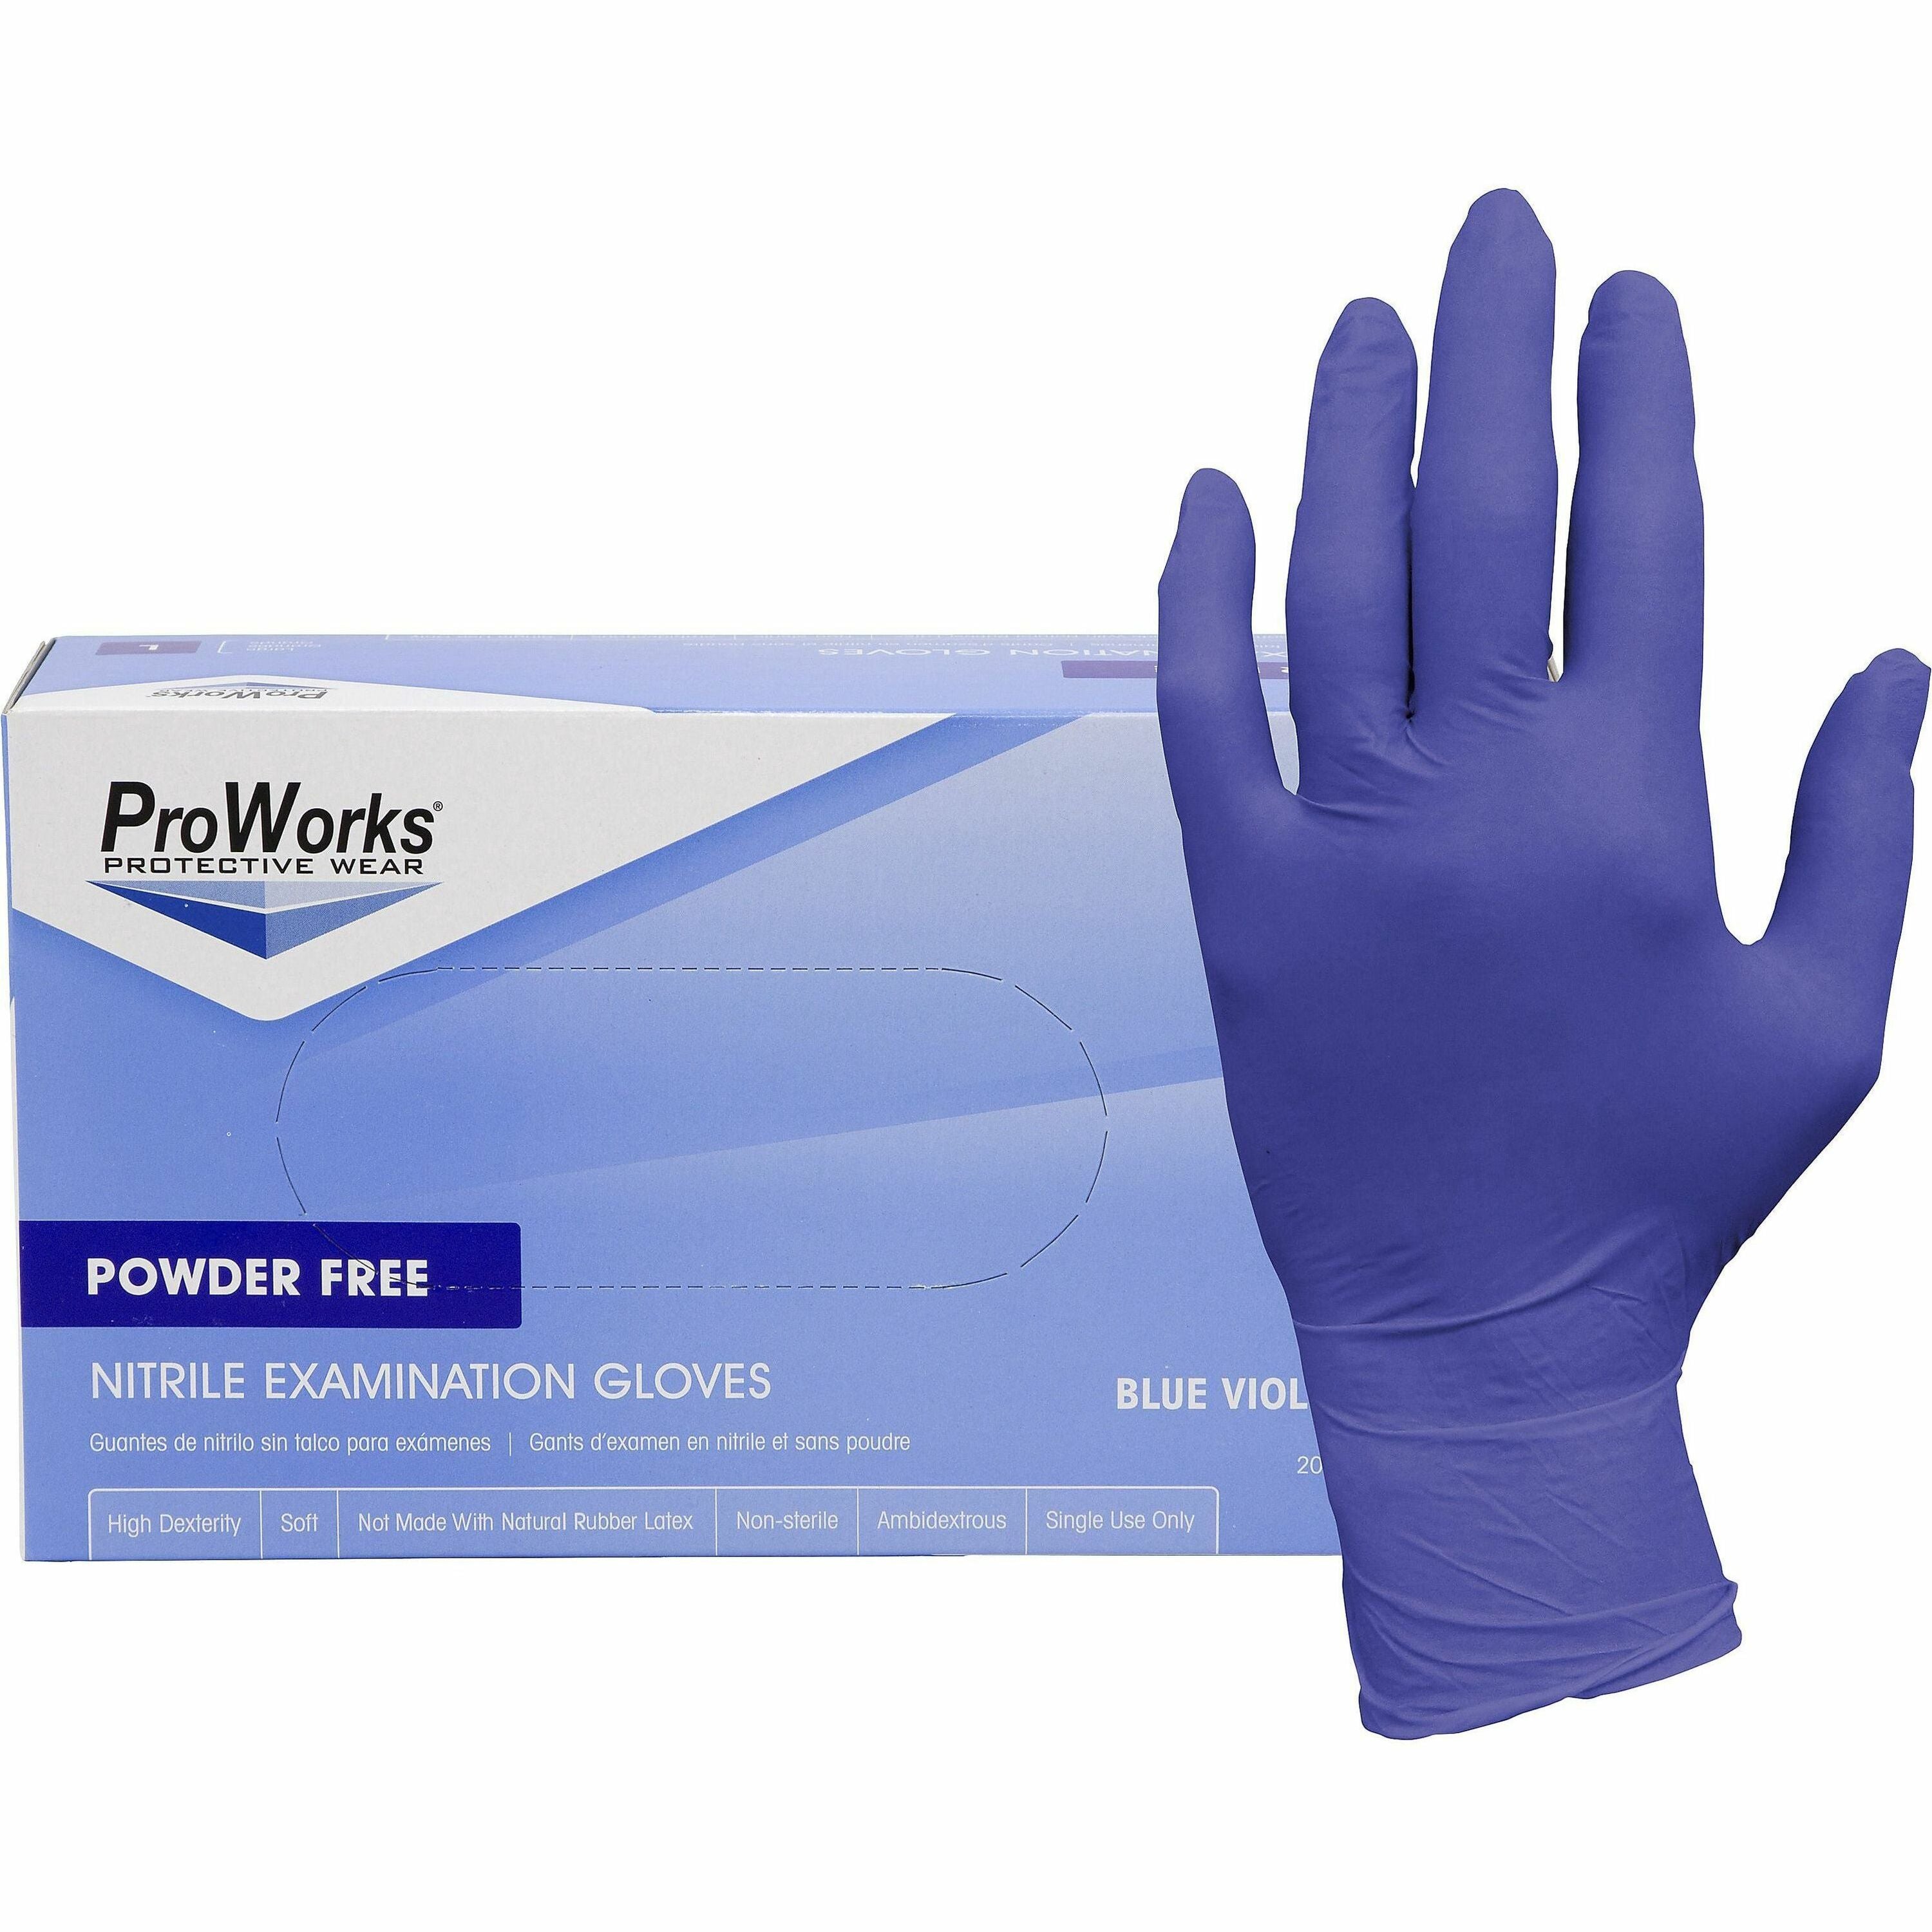 ProWorks Nitrile Exam Gloves - X-Large Size - Nitrile - Blue Violet - Soft, Flexible, Comfortable, Latex-free, Non-sterile - For General Purpose, Industrial, Food Service, Gardening, Dental - 200 / Box - 3 mil Thickness - 9.50" Glove Length